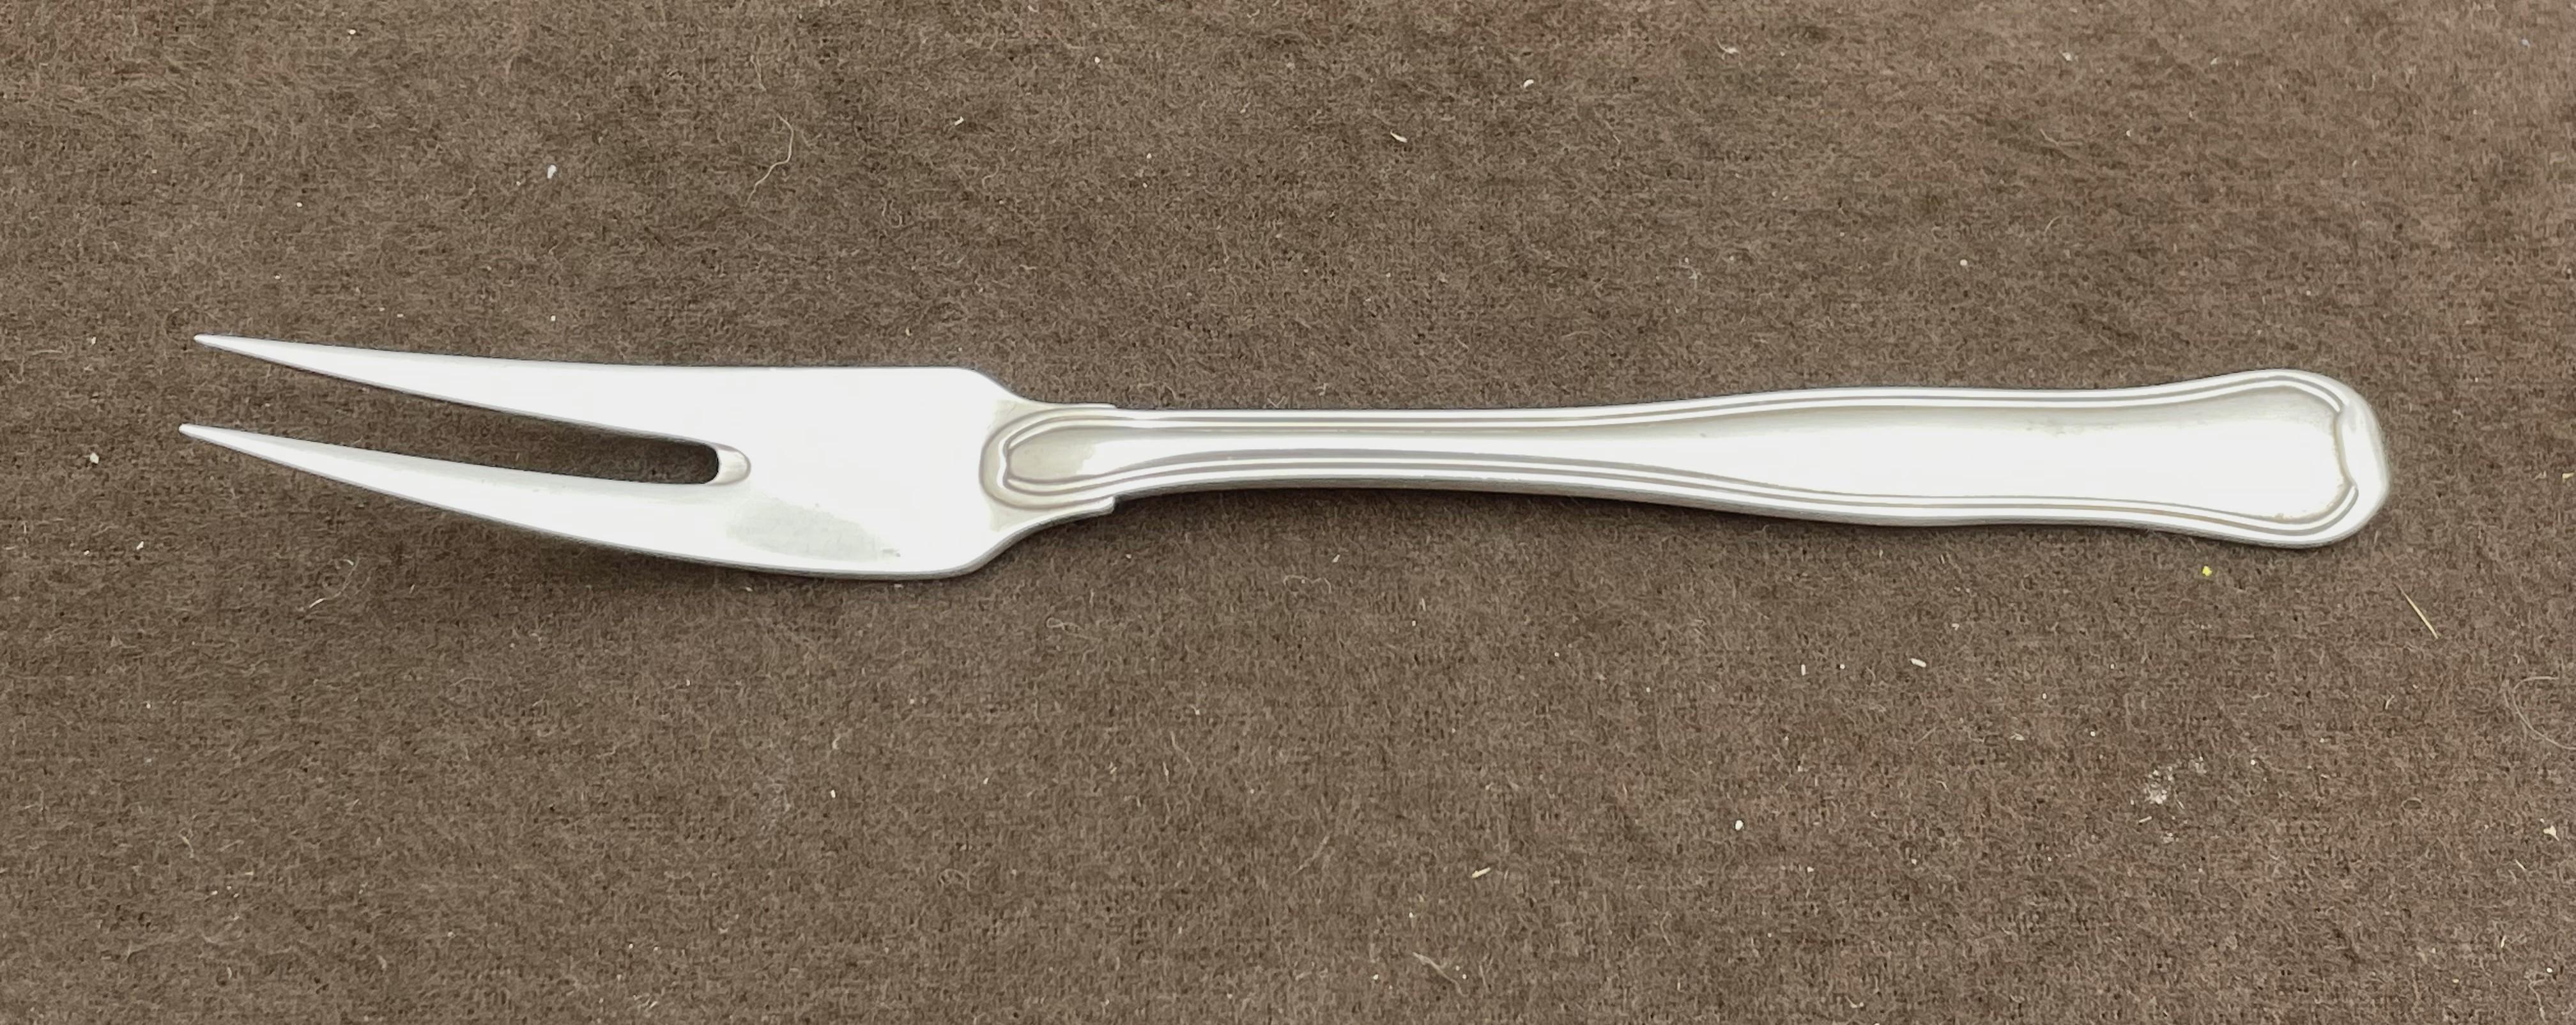 Georg Jensen sterling silver flatware set in Old Danish pattern, in an elegant, Mid-Century Modern style, consisting of:

- a two-tine fork measuring 6 3/4'' in length

- a sauce ladle measuring 7 1/2'' in length

- a 2-piece salad server consisting